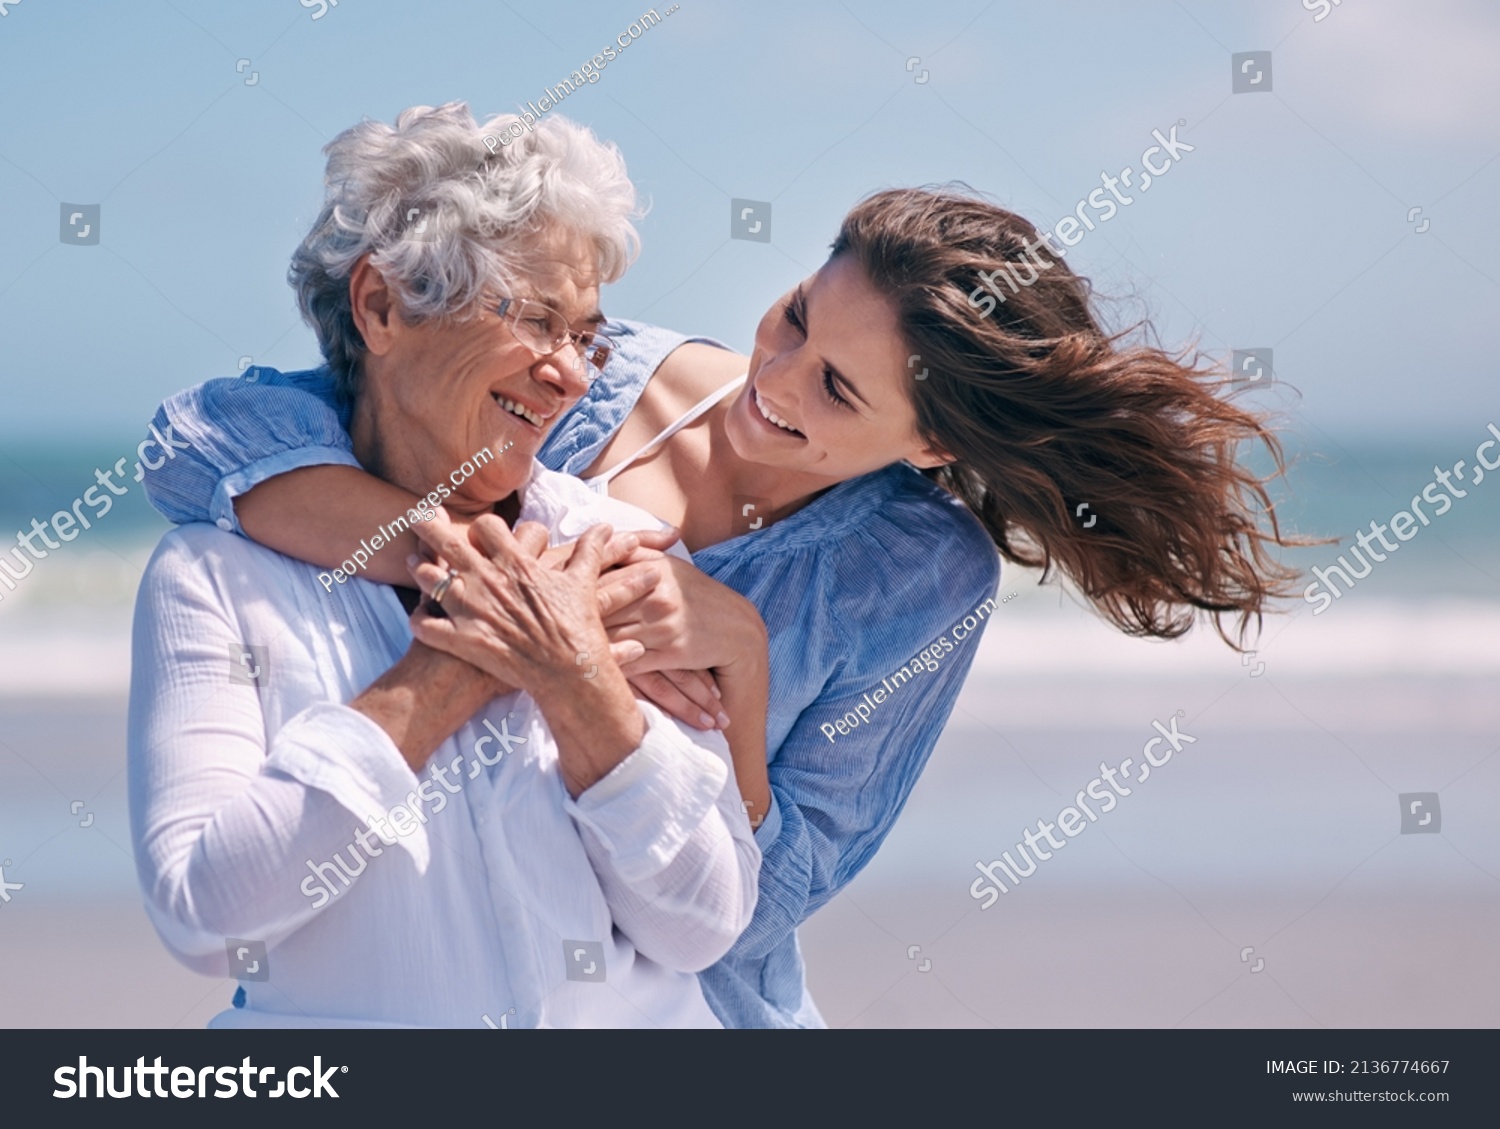 Taking time out to show some tenderness. Shot of a beautiful young woman and her senior mother on the beach. #2136774667